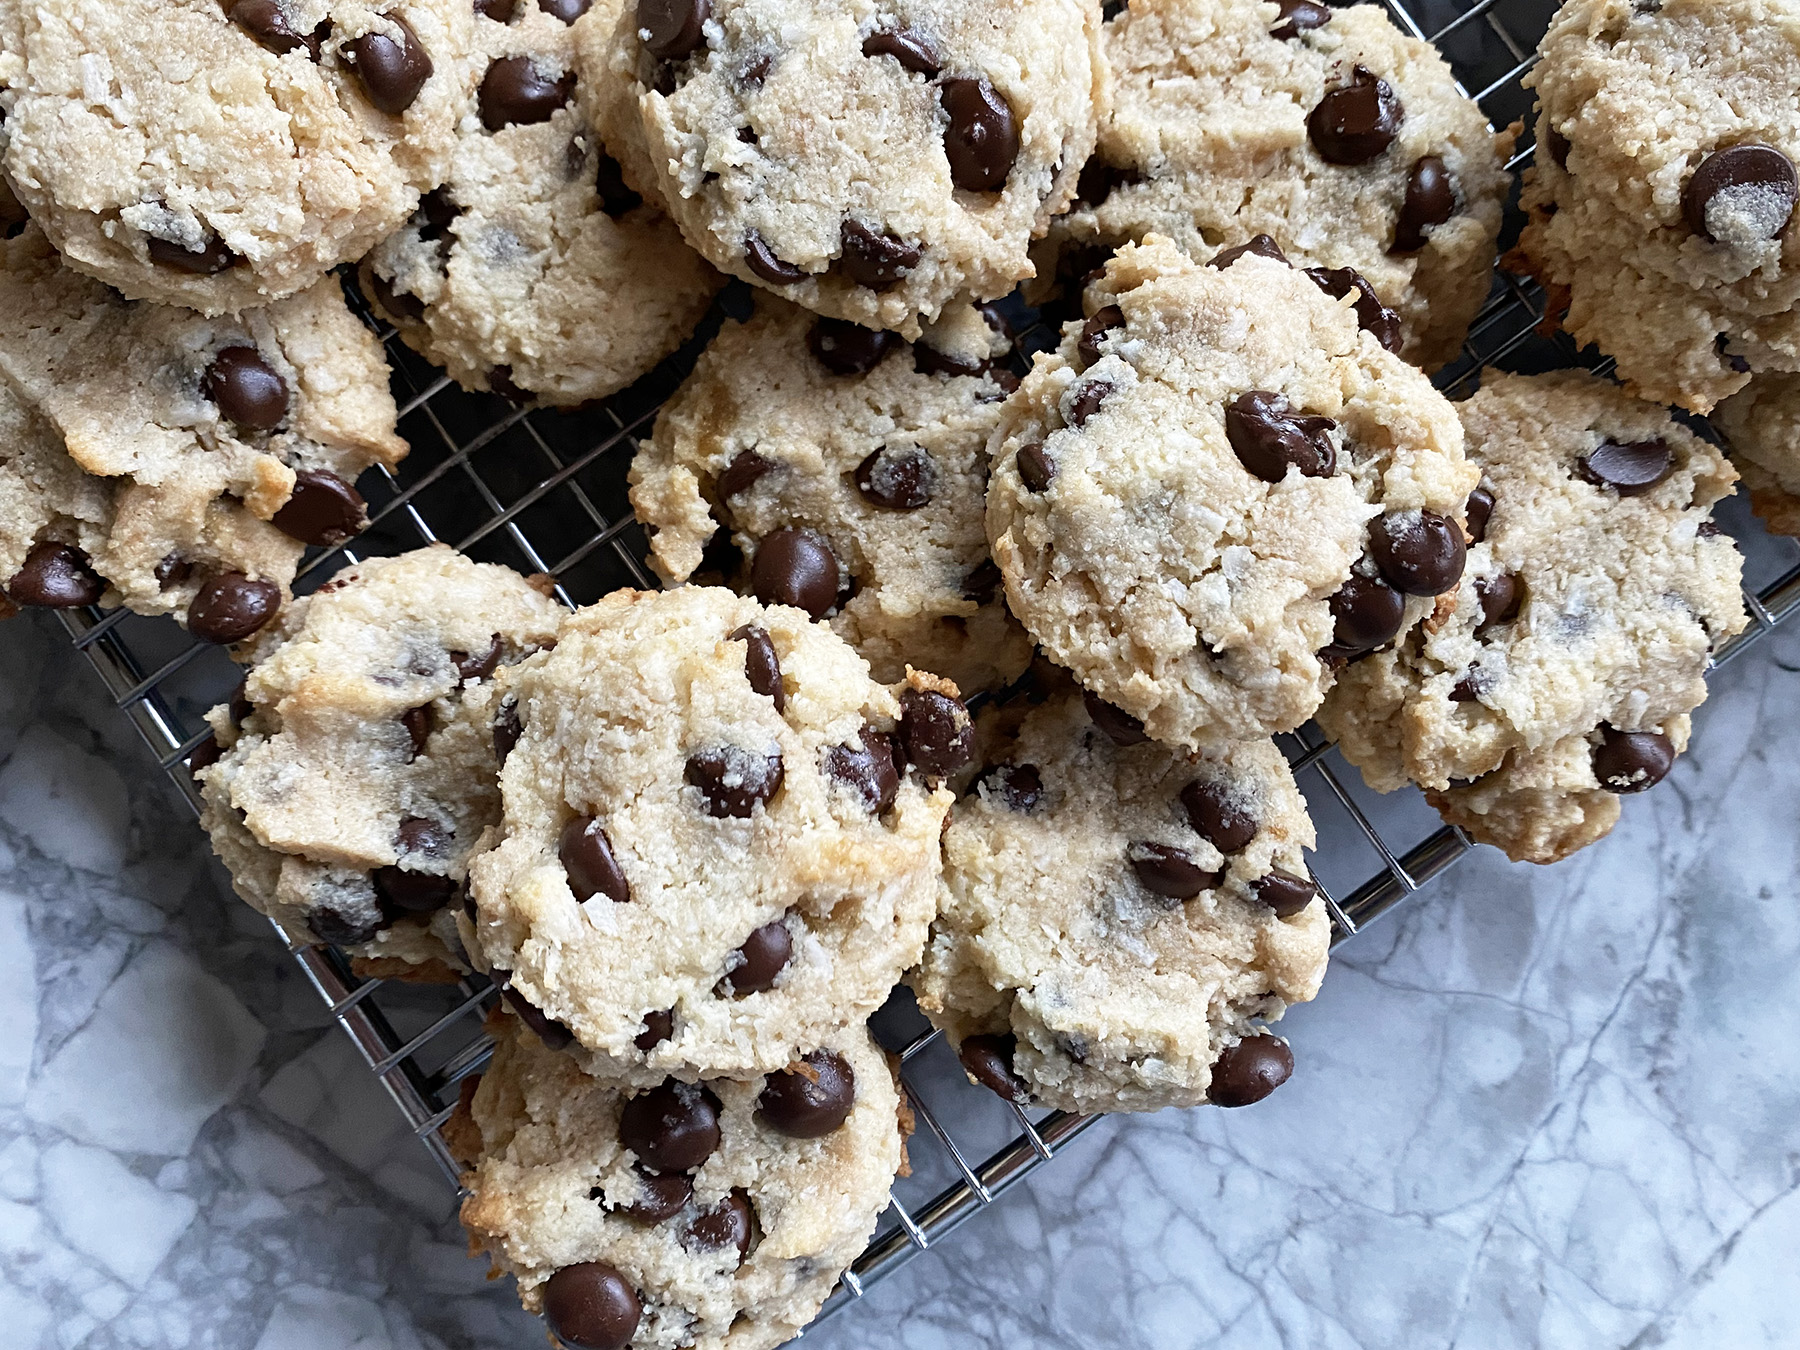 Almond, Chocolate Chip and Coconut Cookies (Gluten-free)